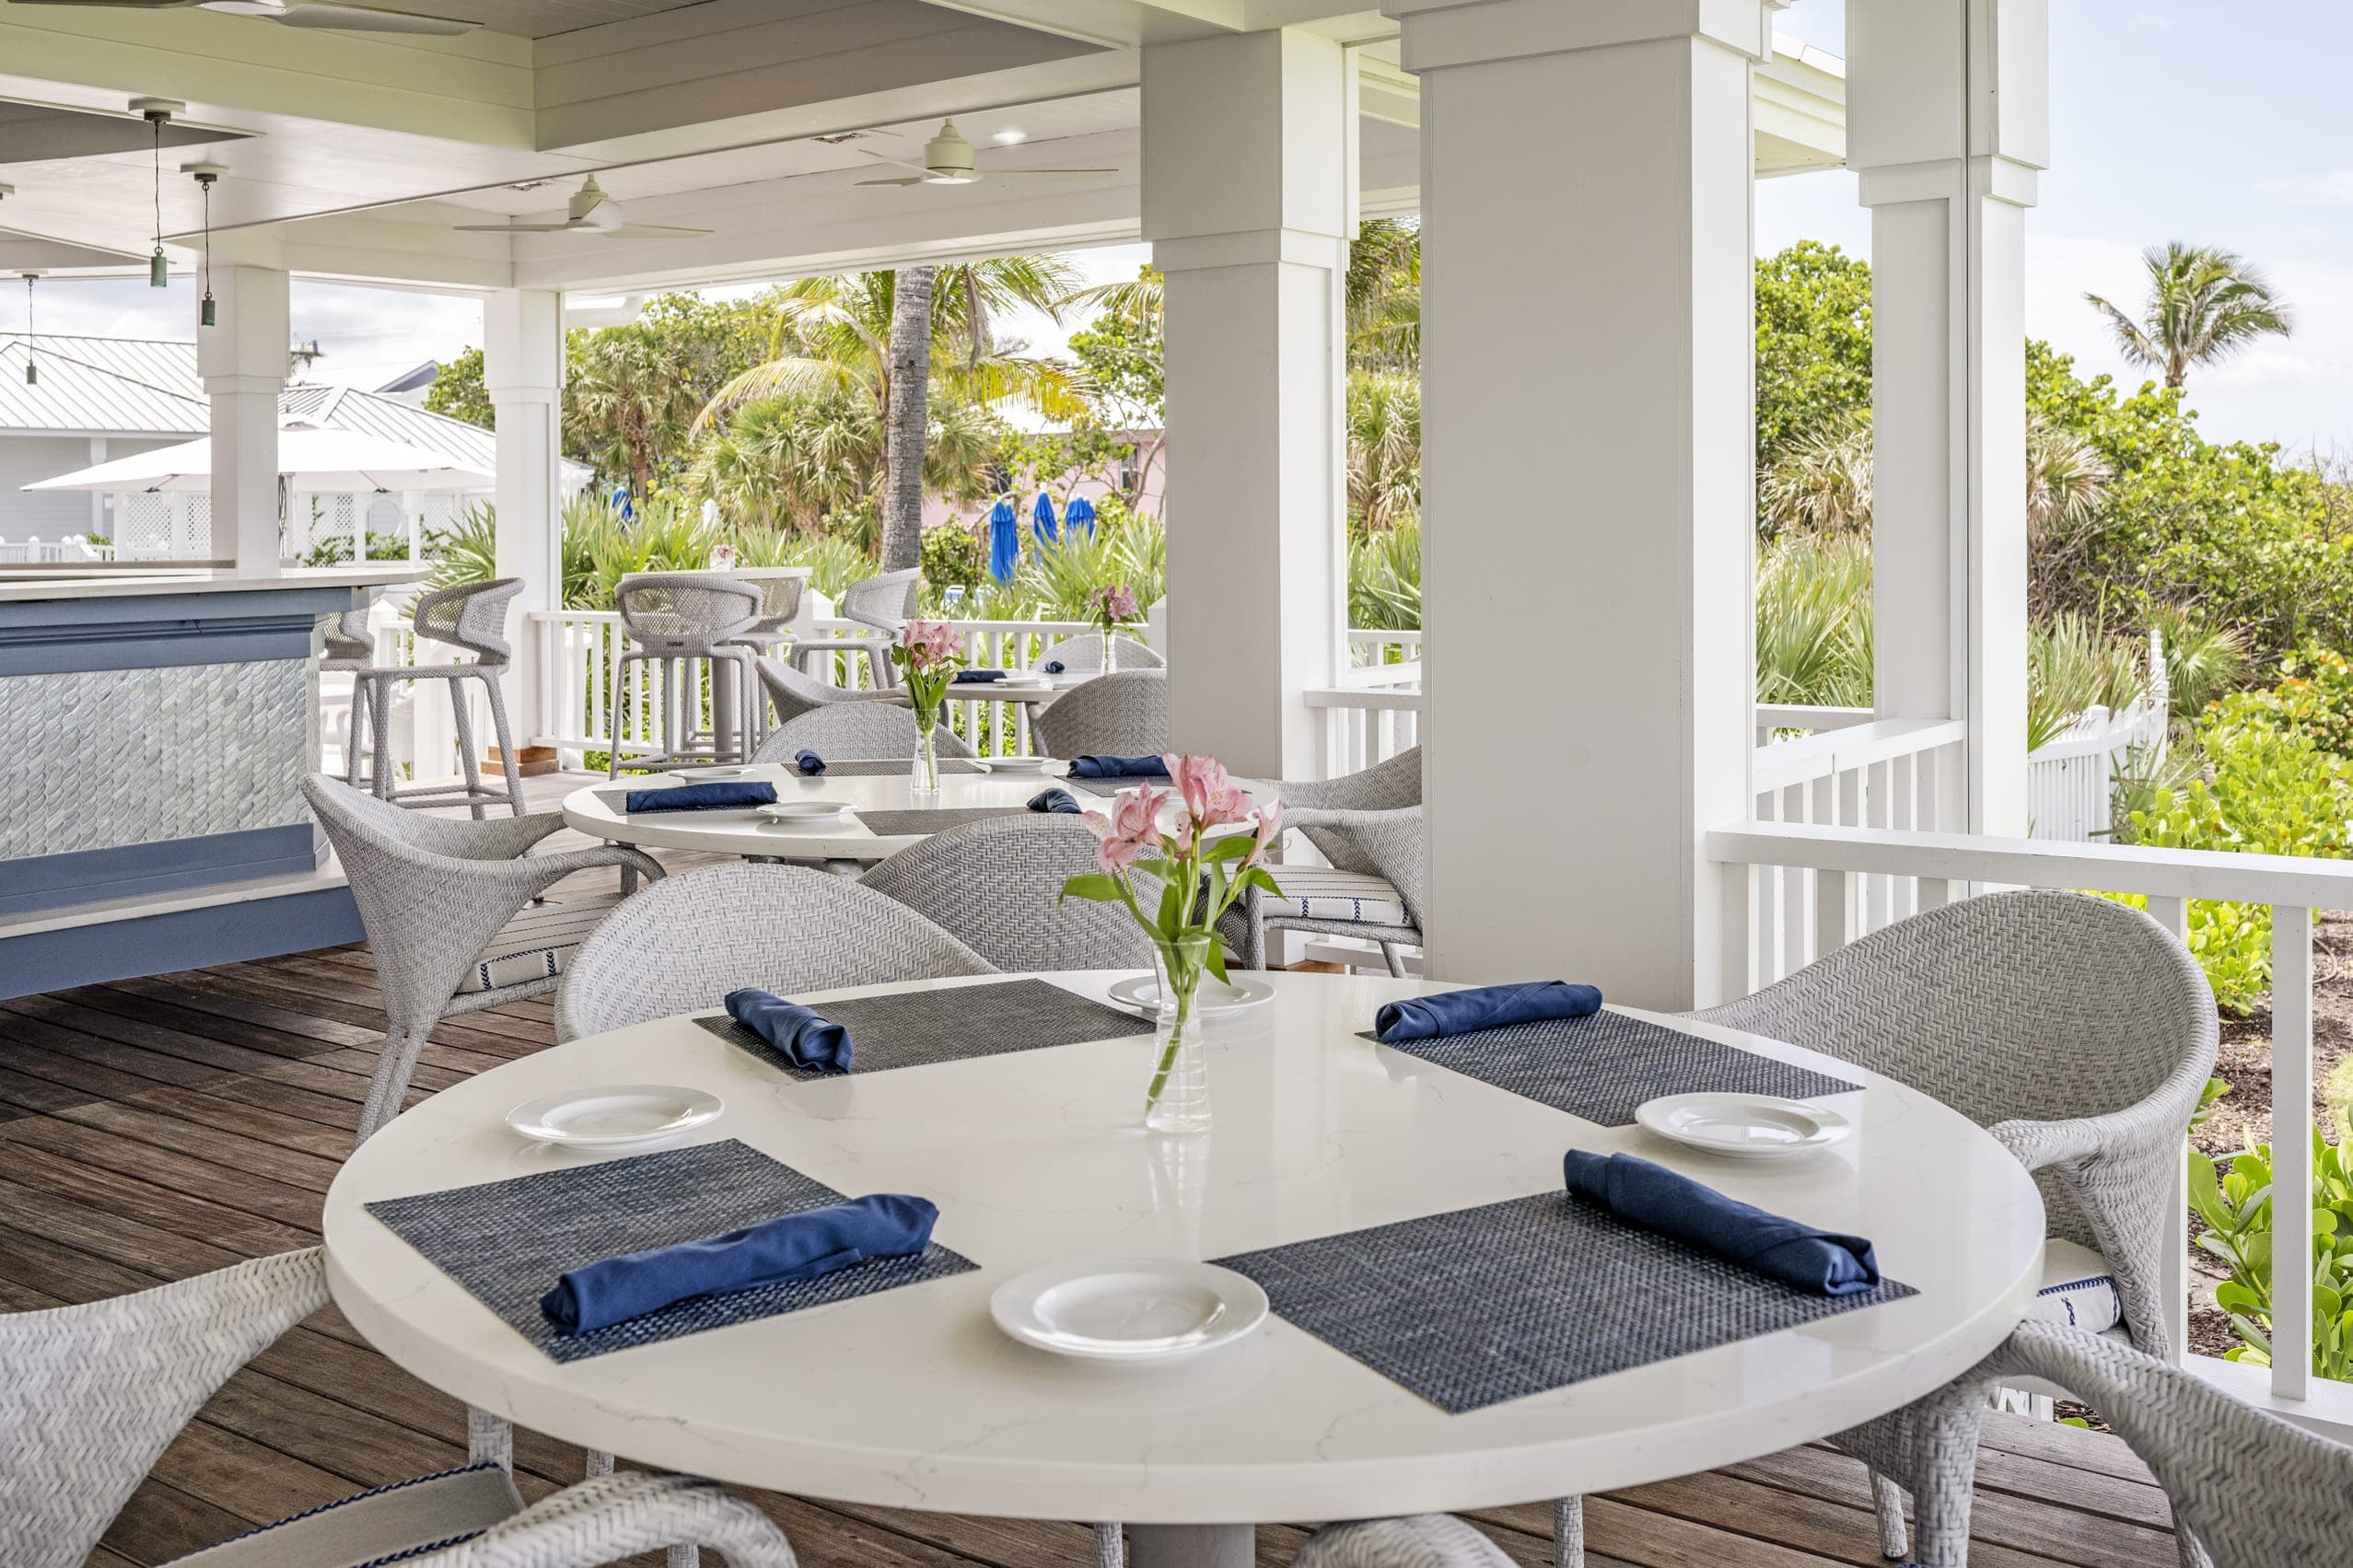 White Wicker Chairs Outside Dining Table Dark Blue Napkin Tropical Palm Trees